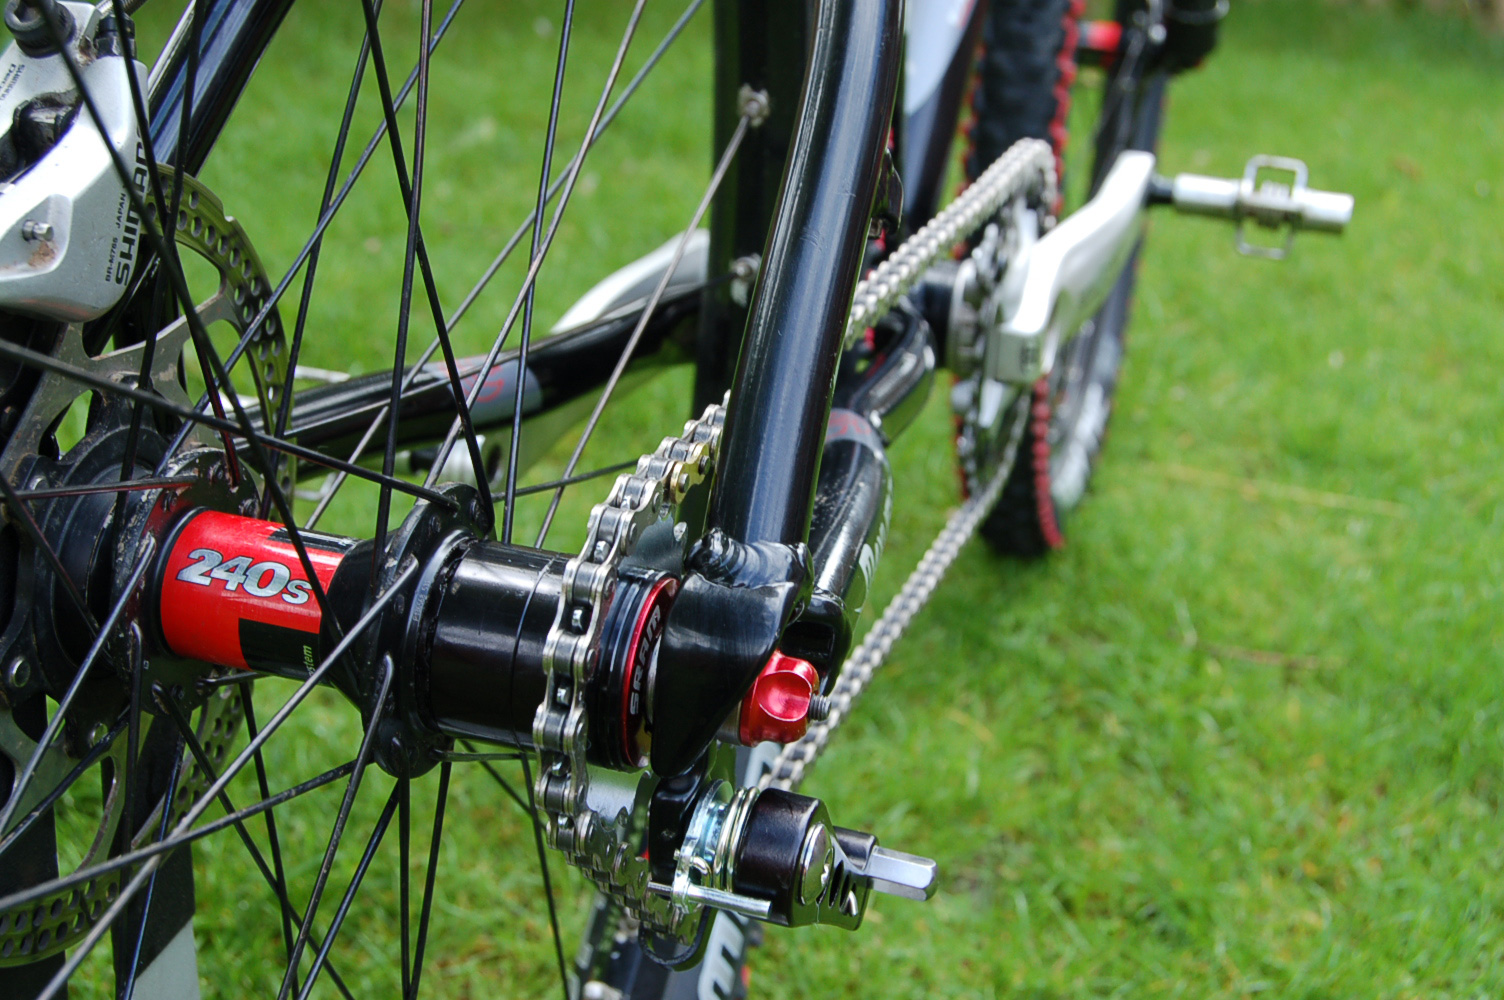 Chain tensioner single speed horizontal dropouts